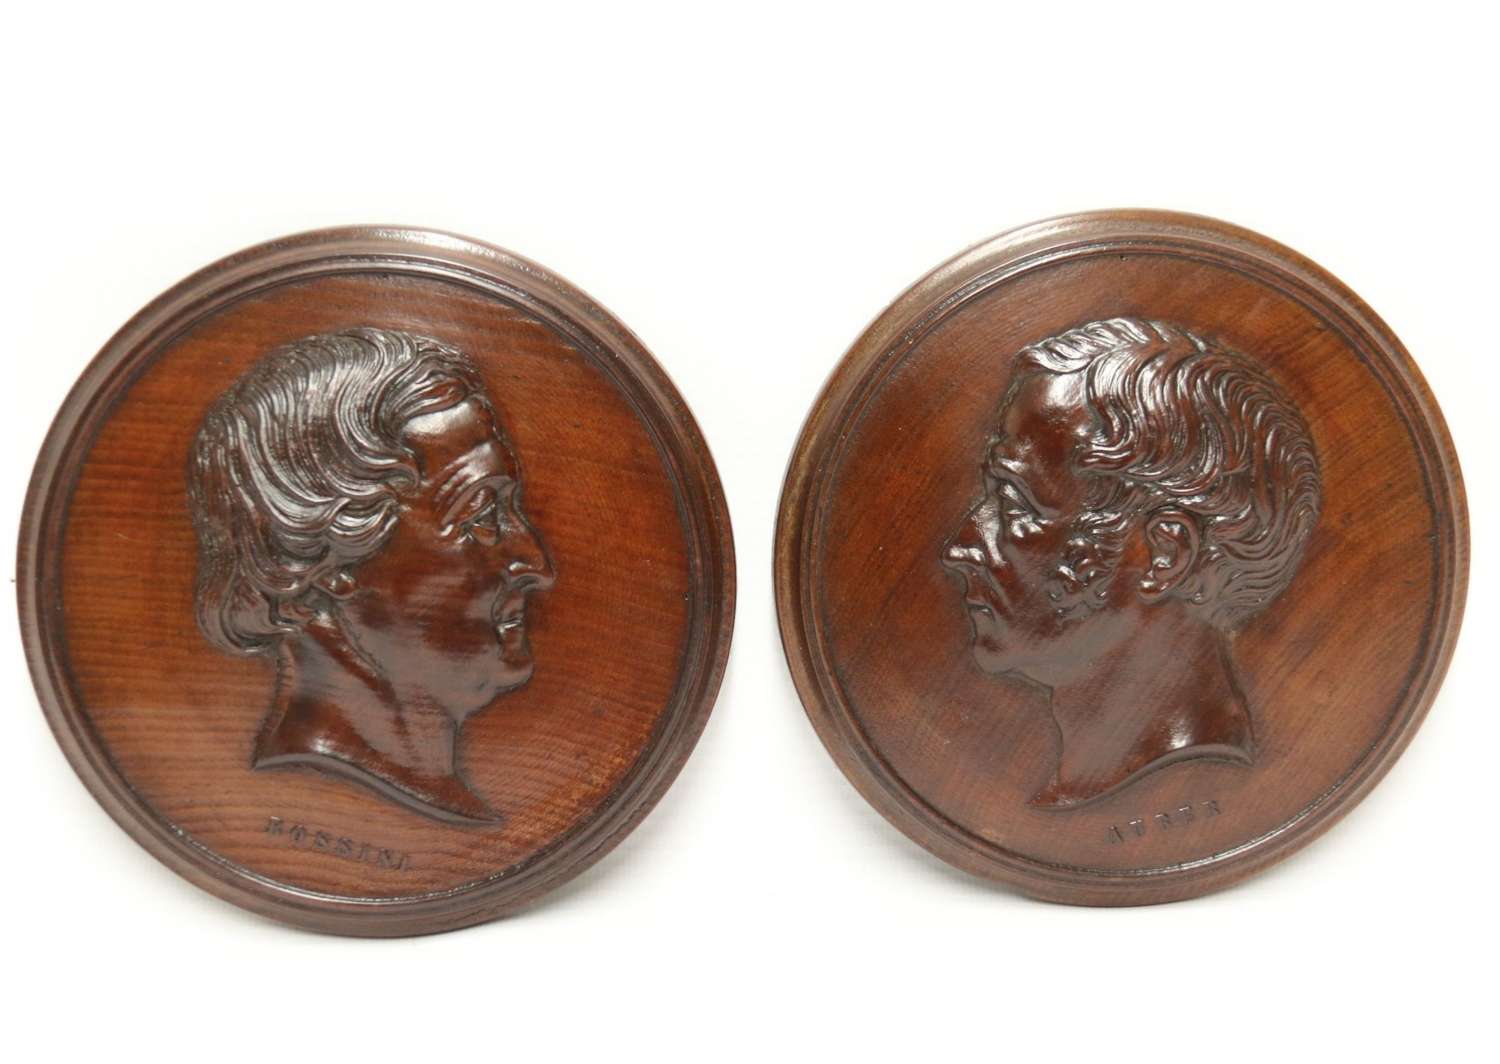 A Very Fine Pair Of Mid 19th Century Carved Mahogany Portrait Wall Plaques
 The Composers Rossini And Auber